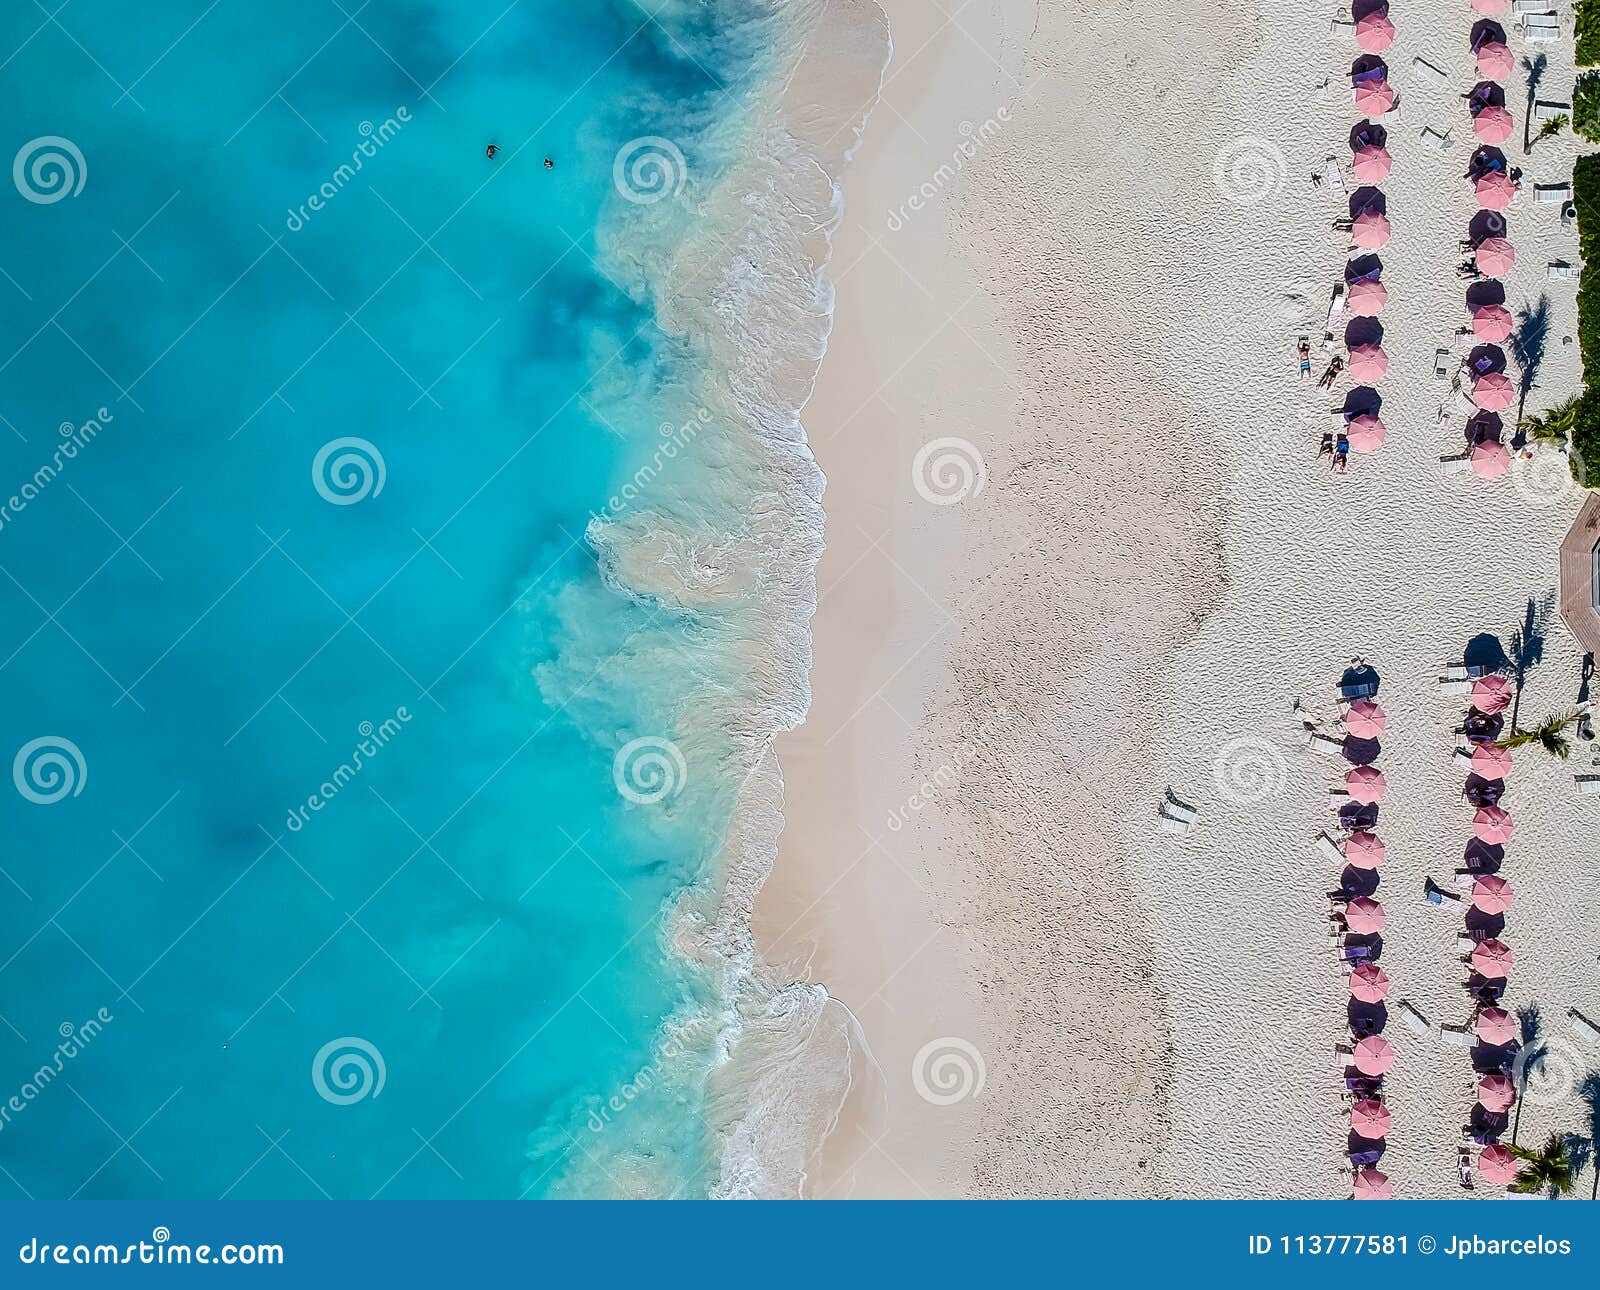 drone photo of beach with red umbrellas in grace bay, providenciales, turks and caicos